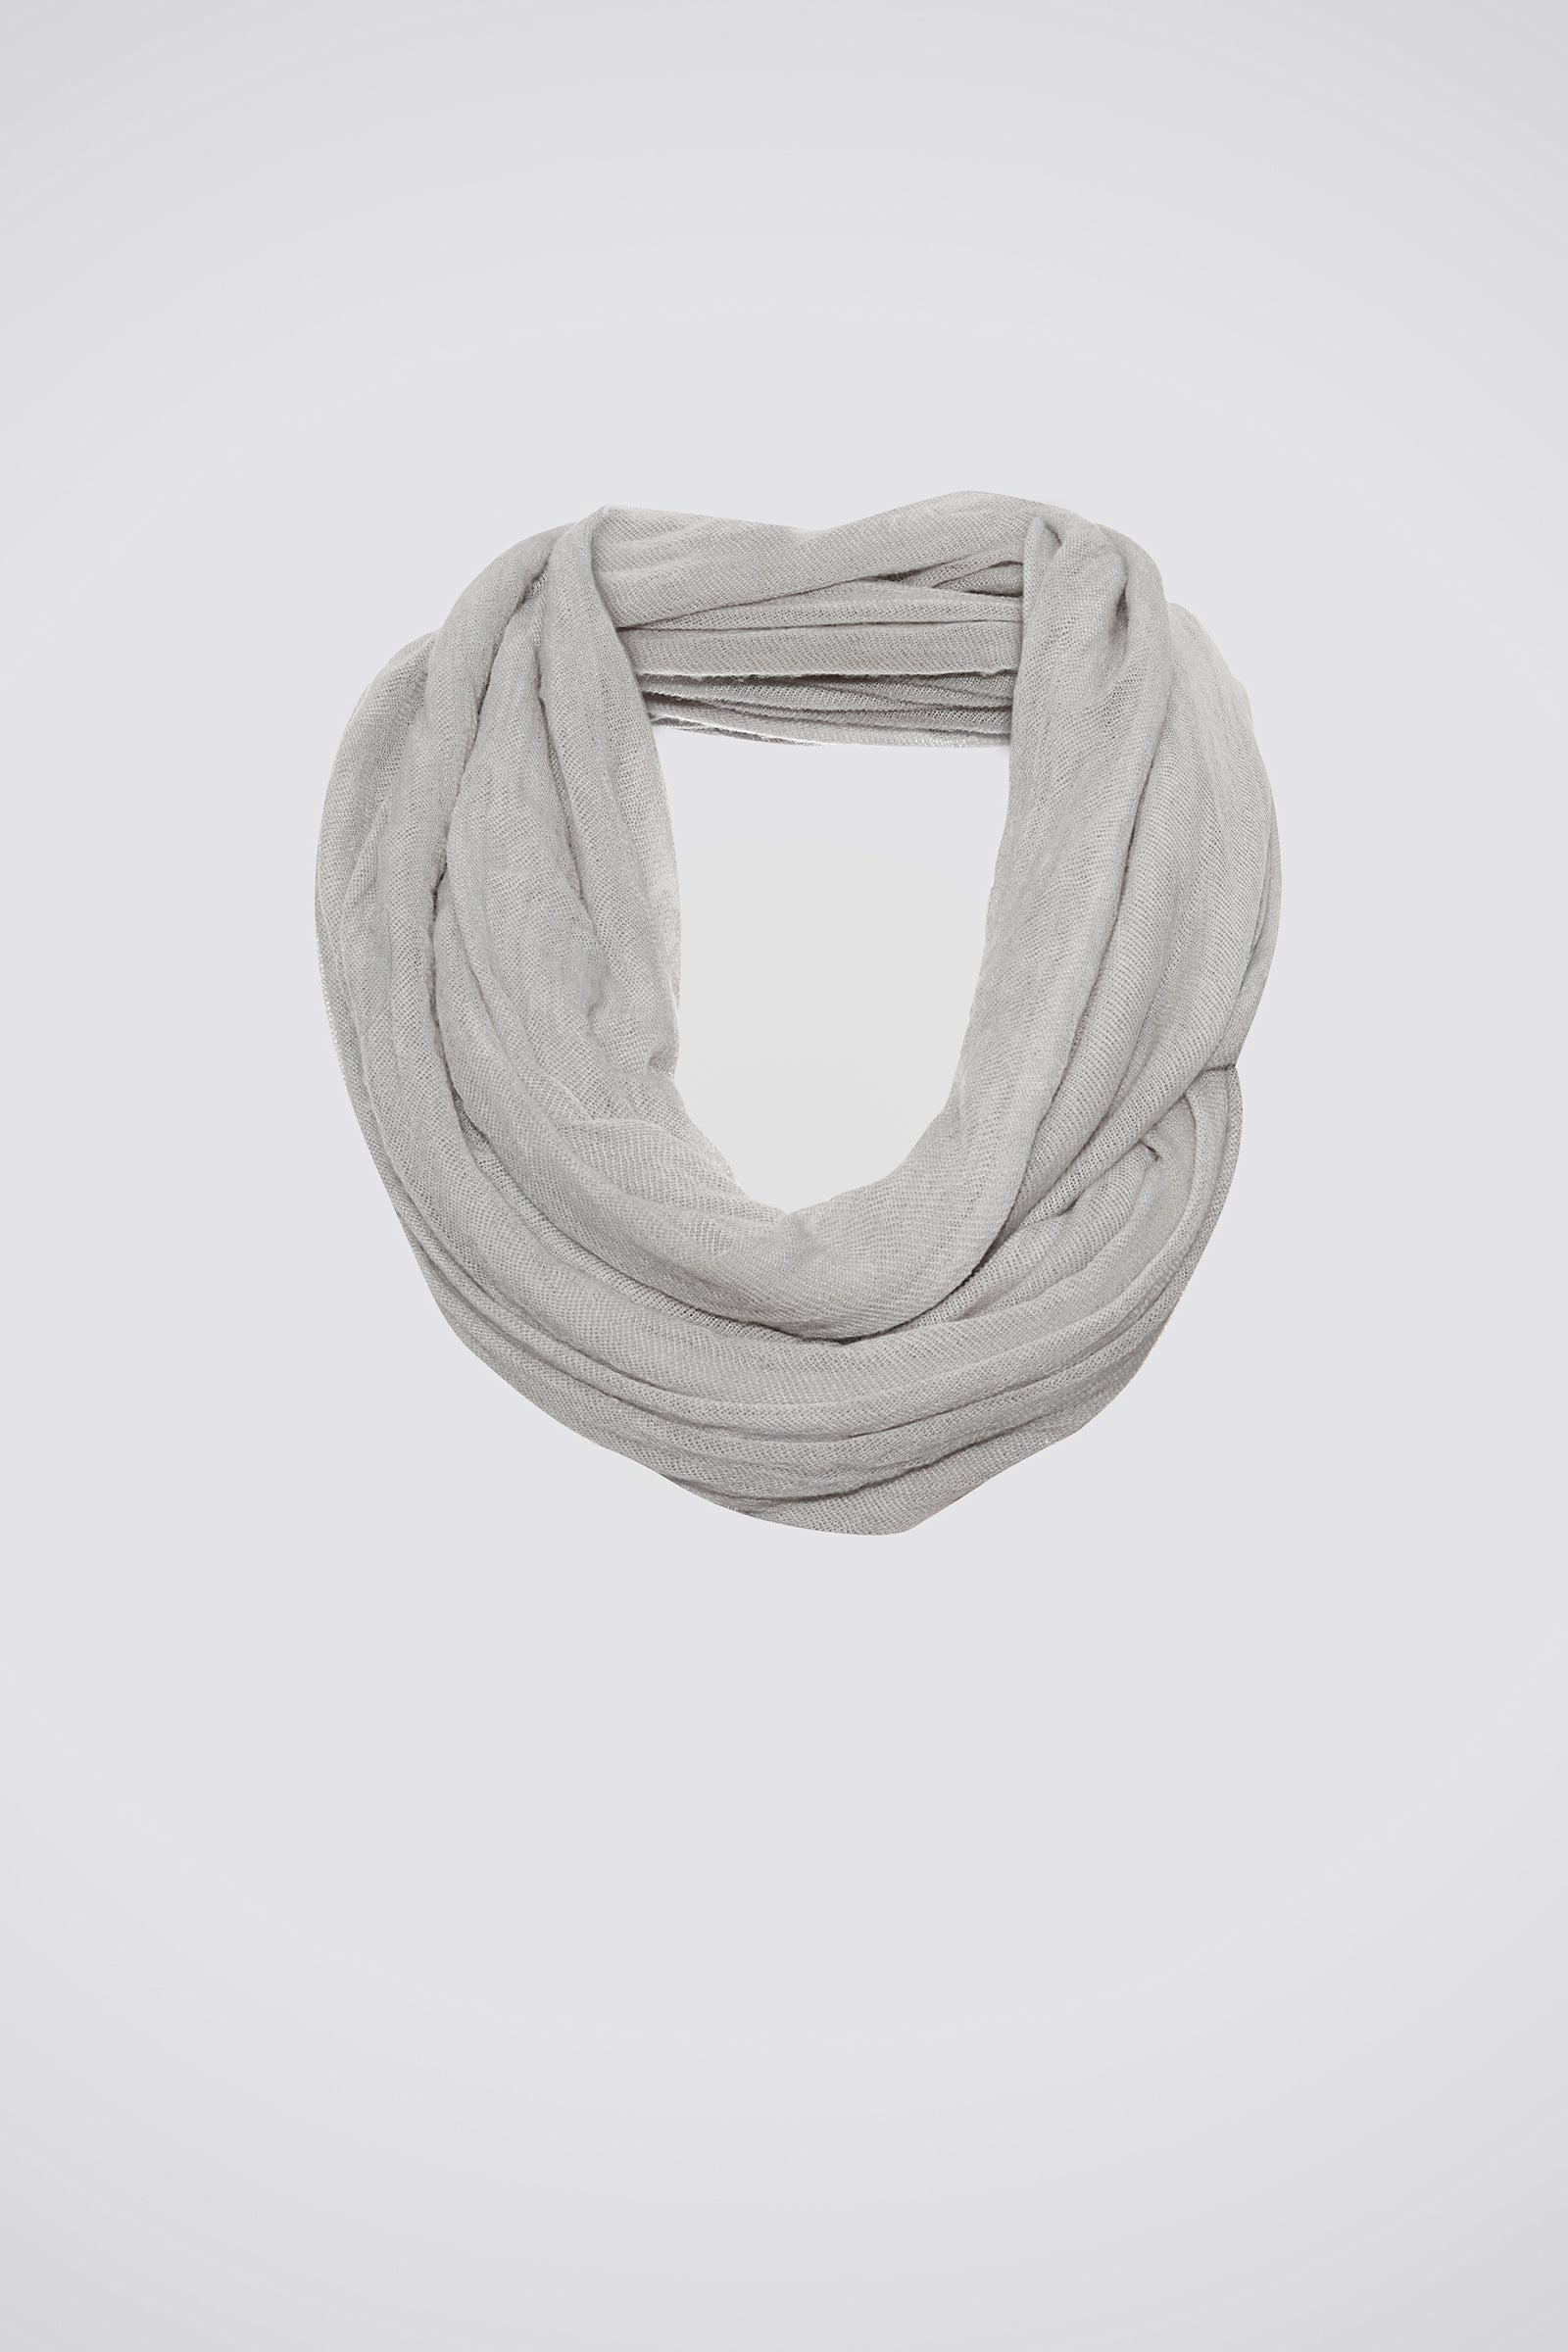 Kal Rieman circle scarf in heather grey on white background product shot flat